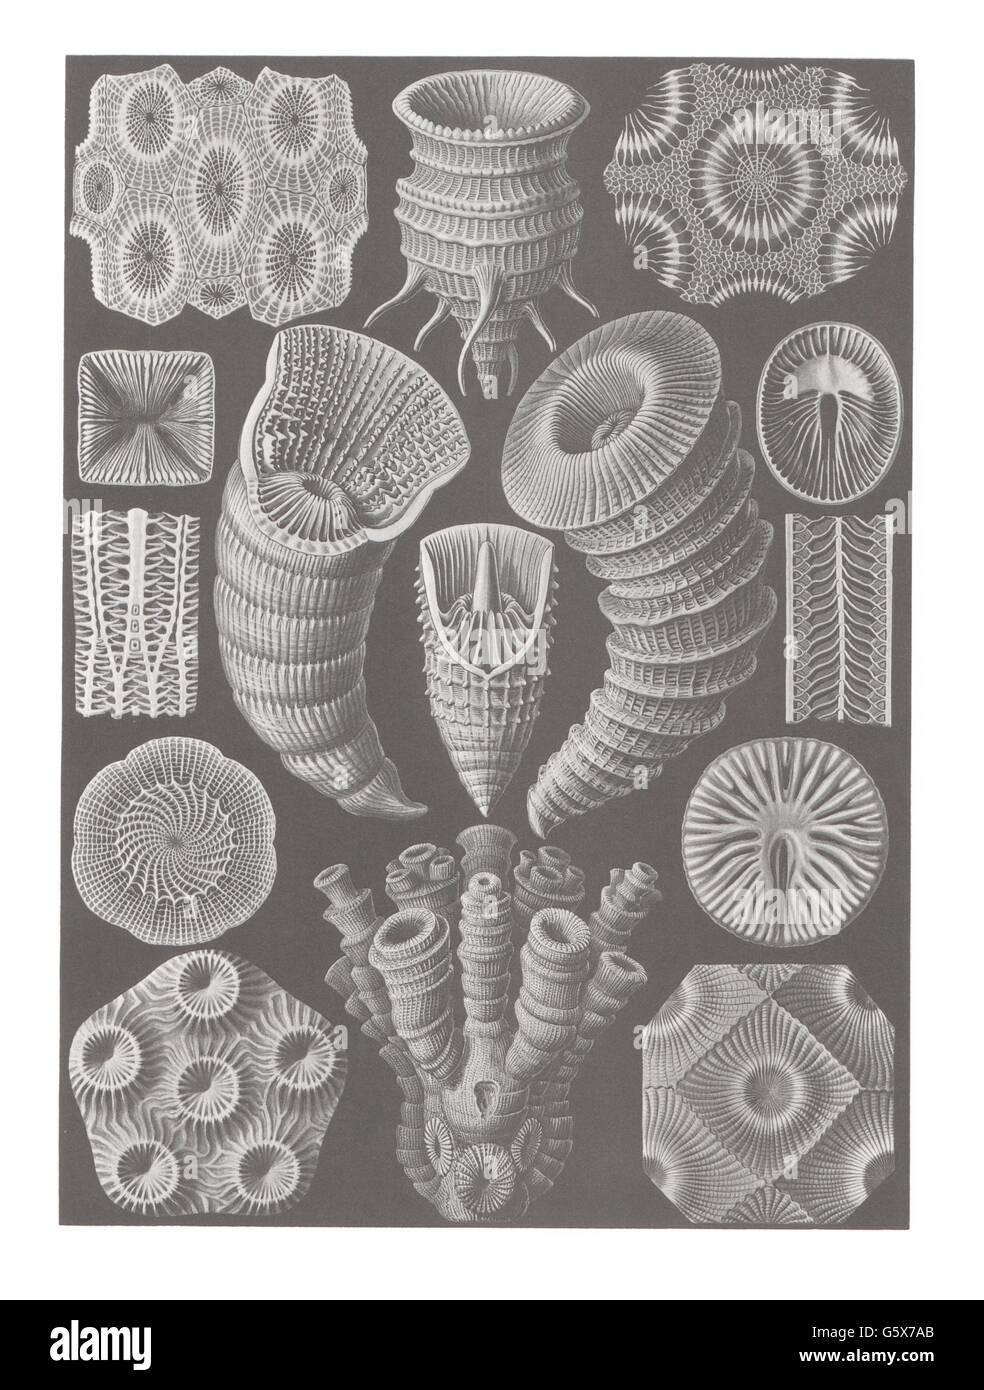 zoologie / Tiere, Anthozoa, Rugosa (Tetracorallia), Farblithographie, aus: Ernst Haeckel, 'Kunstformen der Natur', Leipzig - Wien, 1899 - 1904, Additional-Rights-Clearences-not available Stockfoto